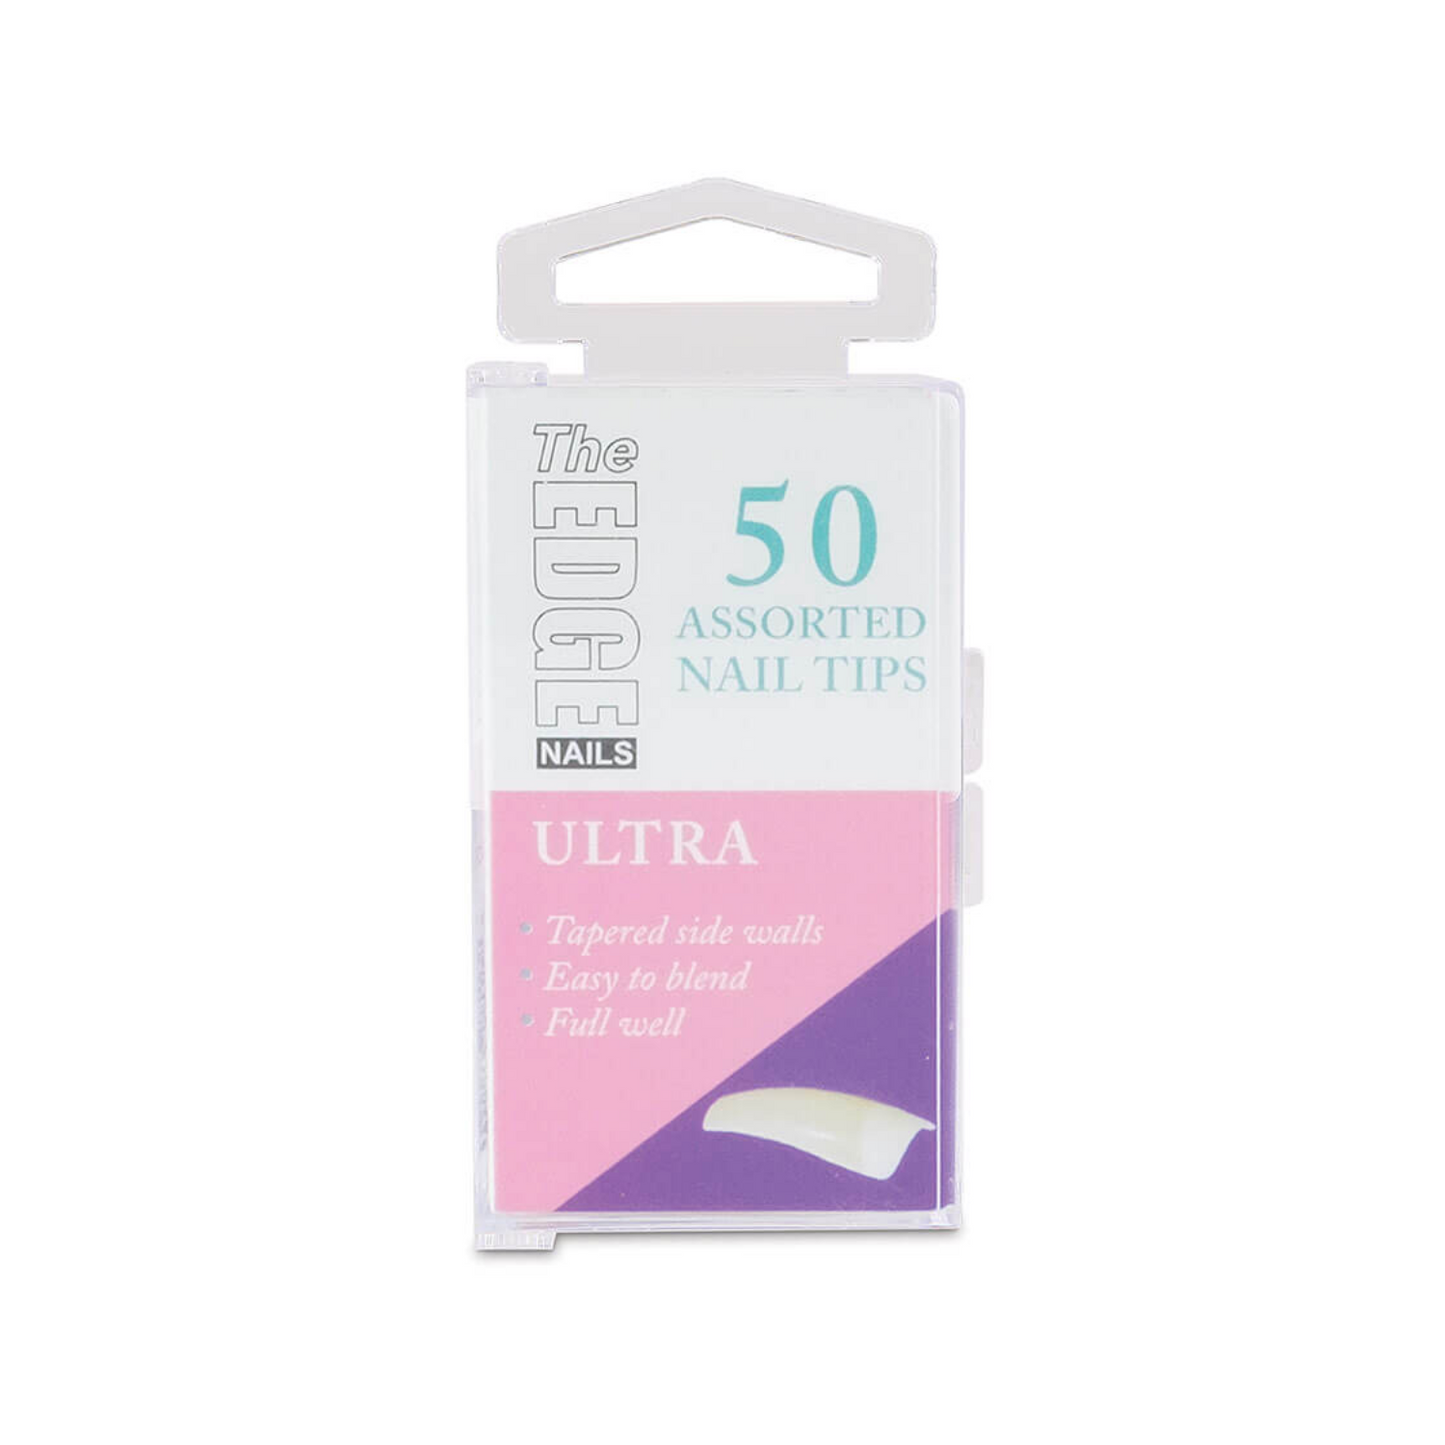 The Edge Ultra Nail Tips Pack of 50 - Size 5 (SHOP)